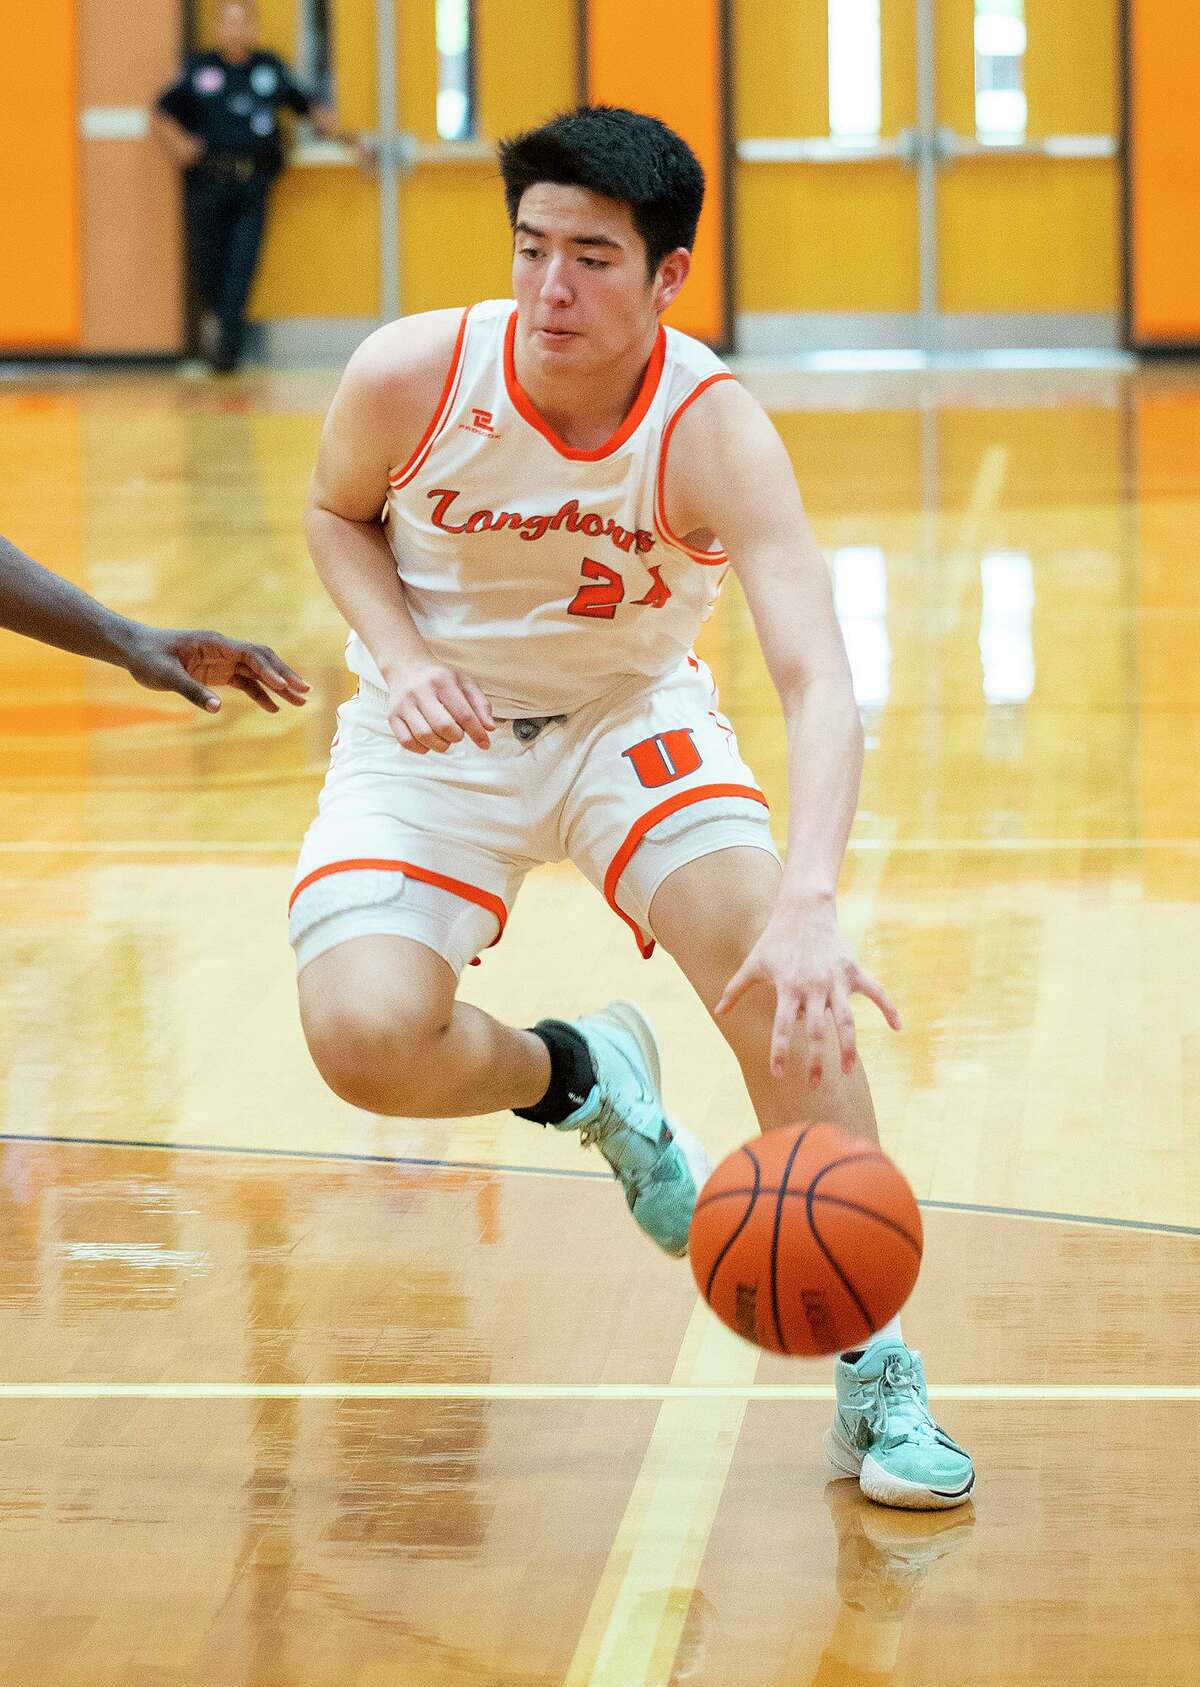 United High School Victor Koo moves the ball down the court during a game against Clemens High School, Saturday, Dec. 18, 2021 at United High School.